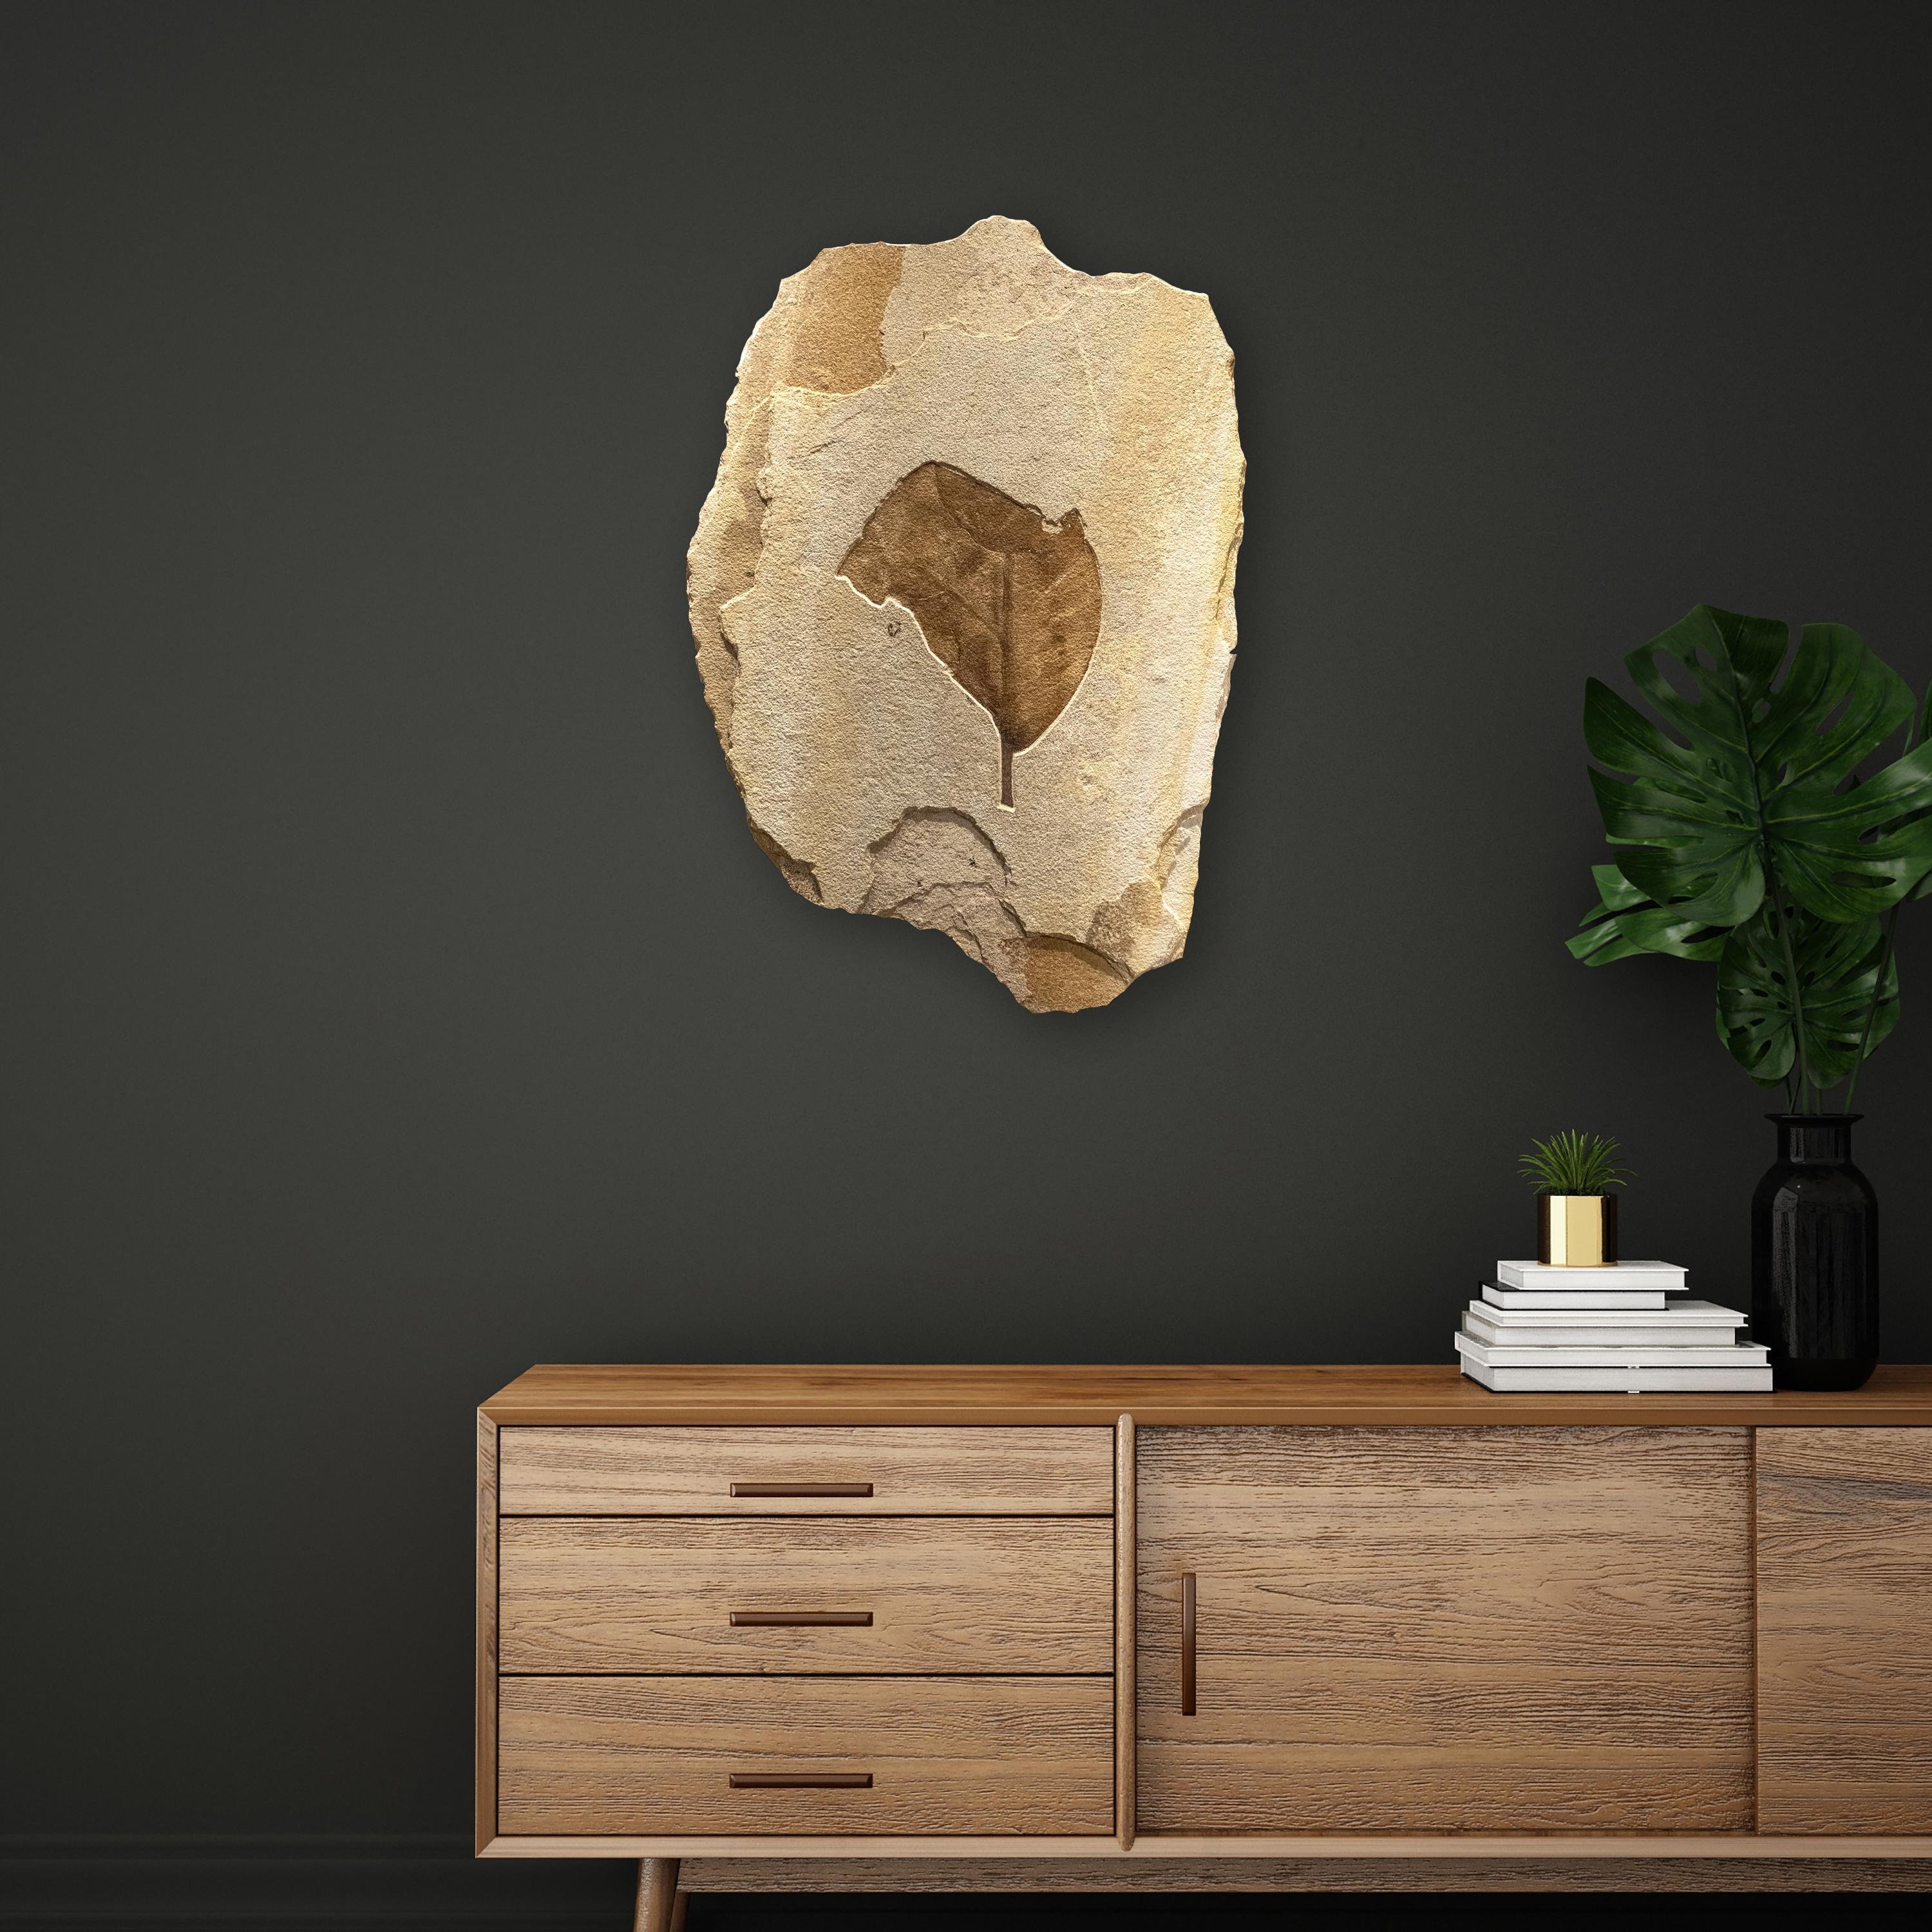 This exquisite and sculptural fossil mural features a large leaf, which is an Eocene era fossil dating back about 50 million years. Fossilized plant life has the potential to produce some of our most aesthetic murals, and due to the extremely